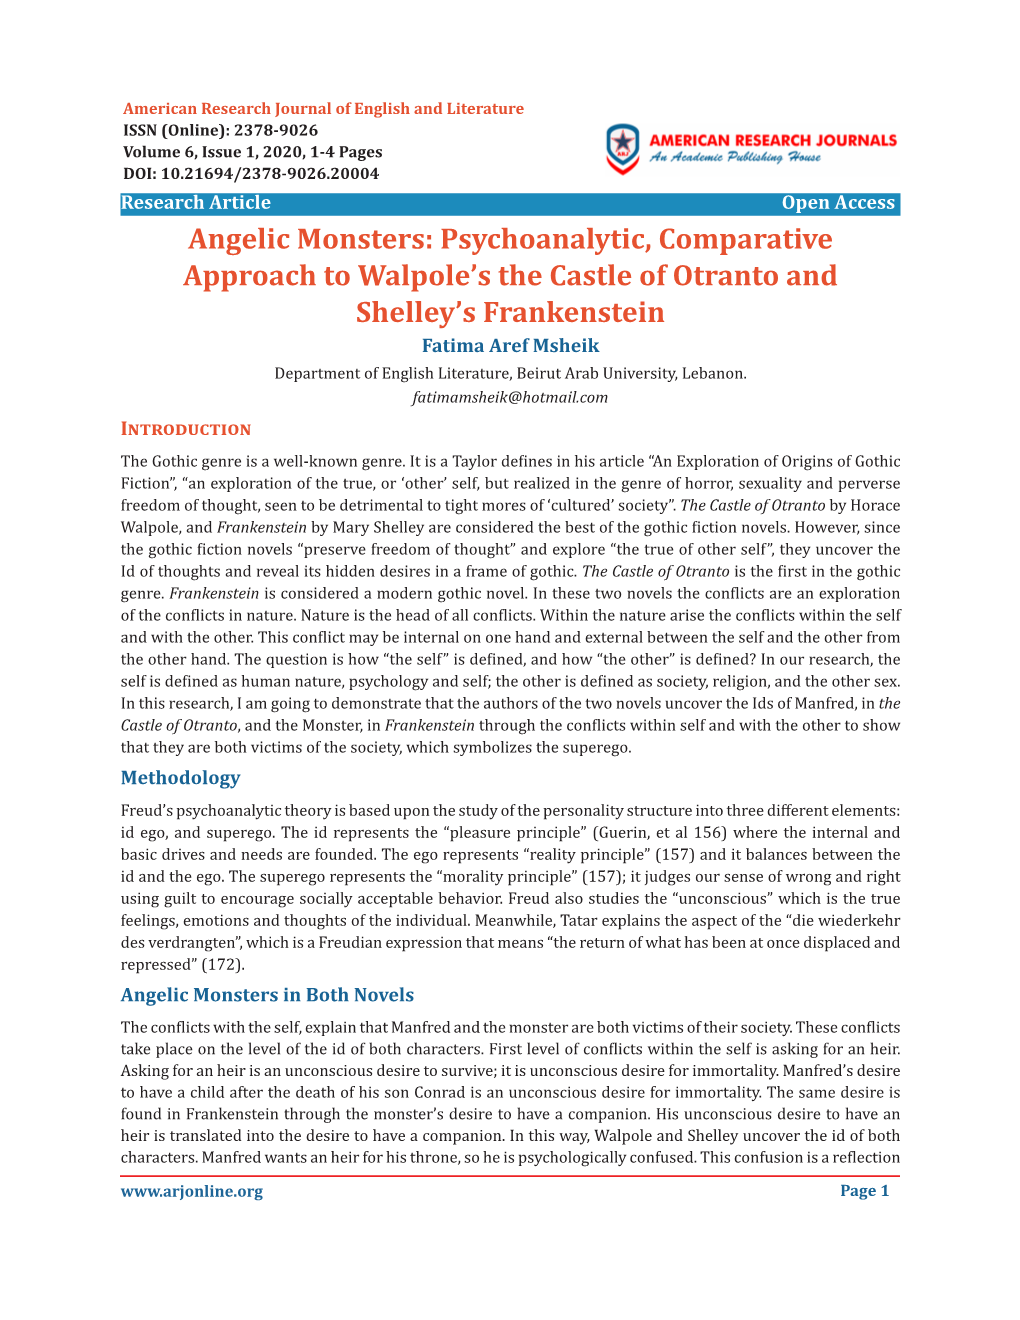 Psychoanalytic, Comparative Approach to Walpole's the Castle of Otranto and Shelley's Frankenstein